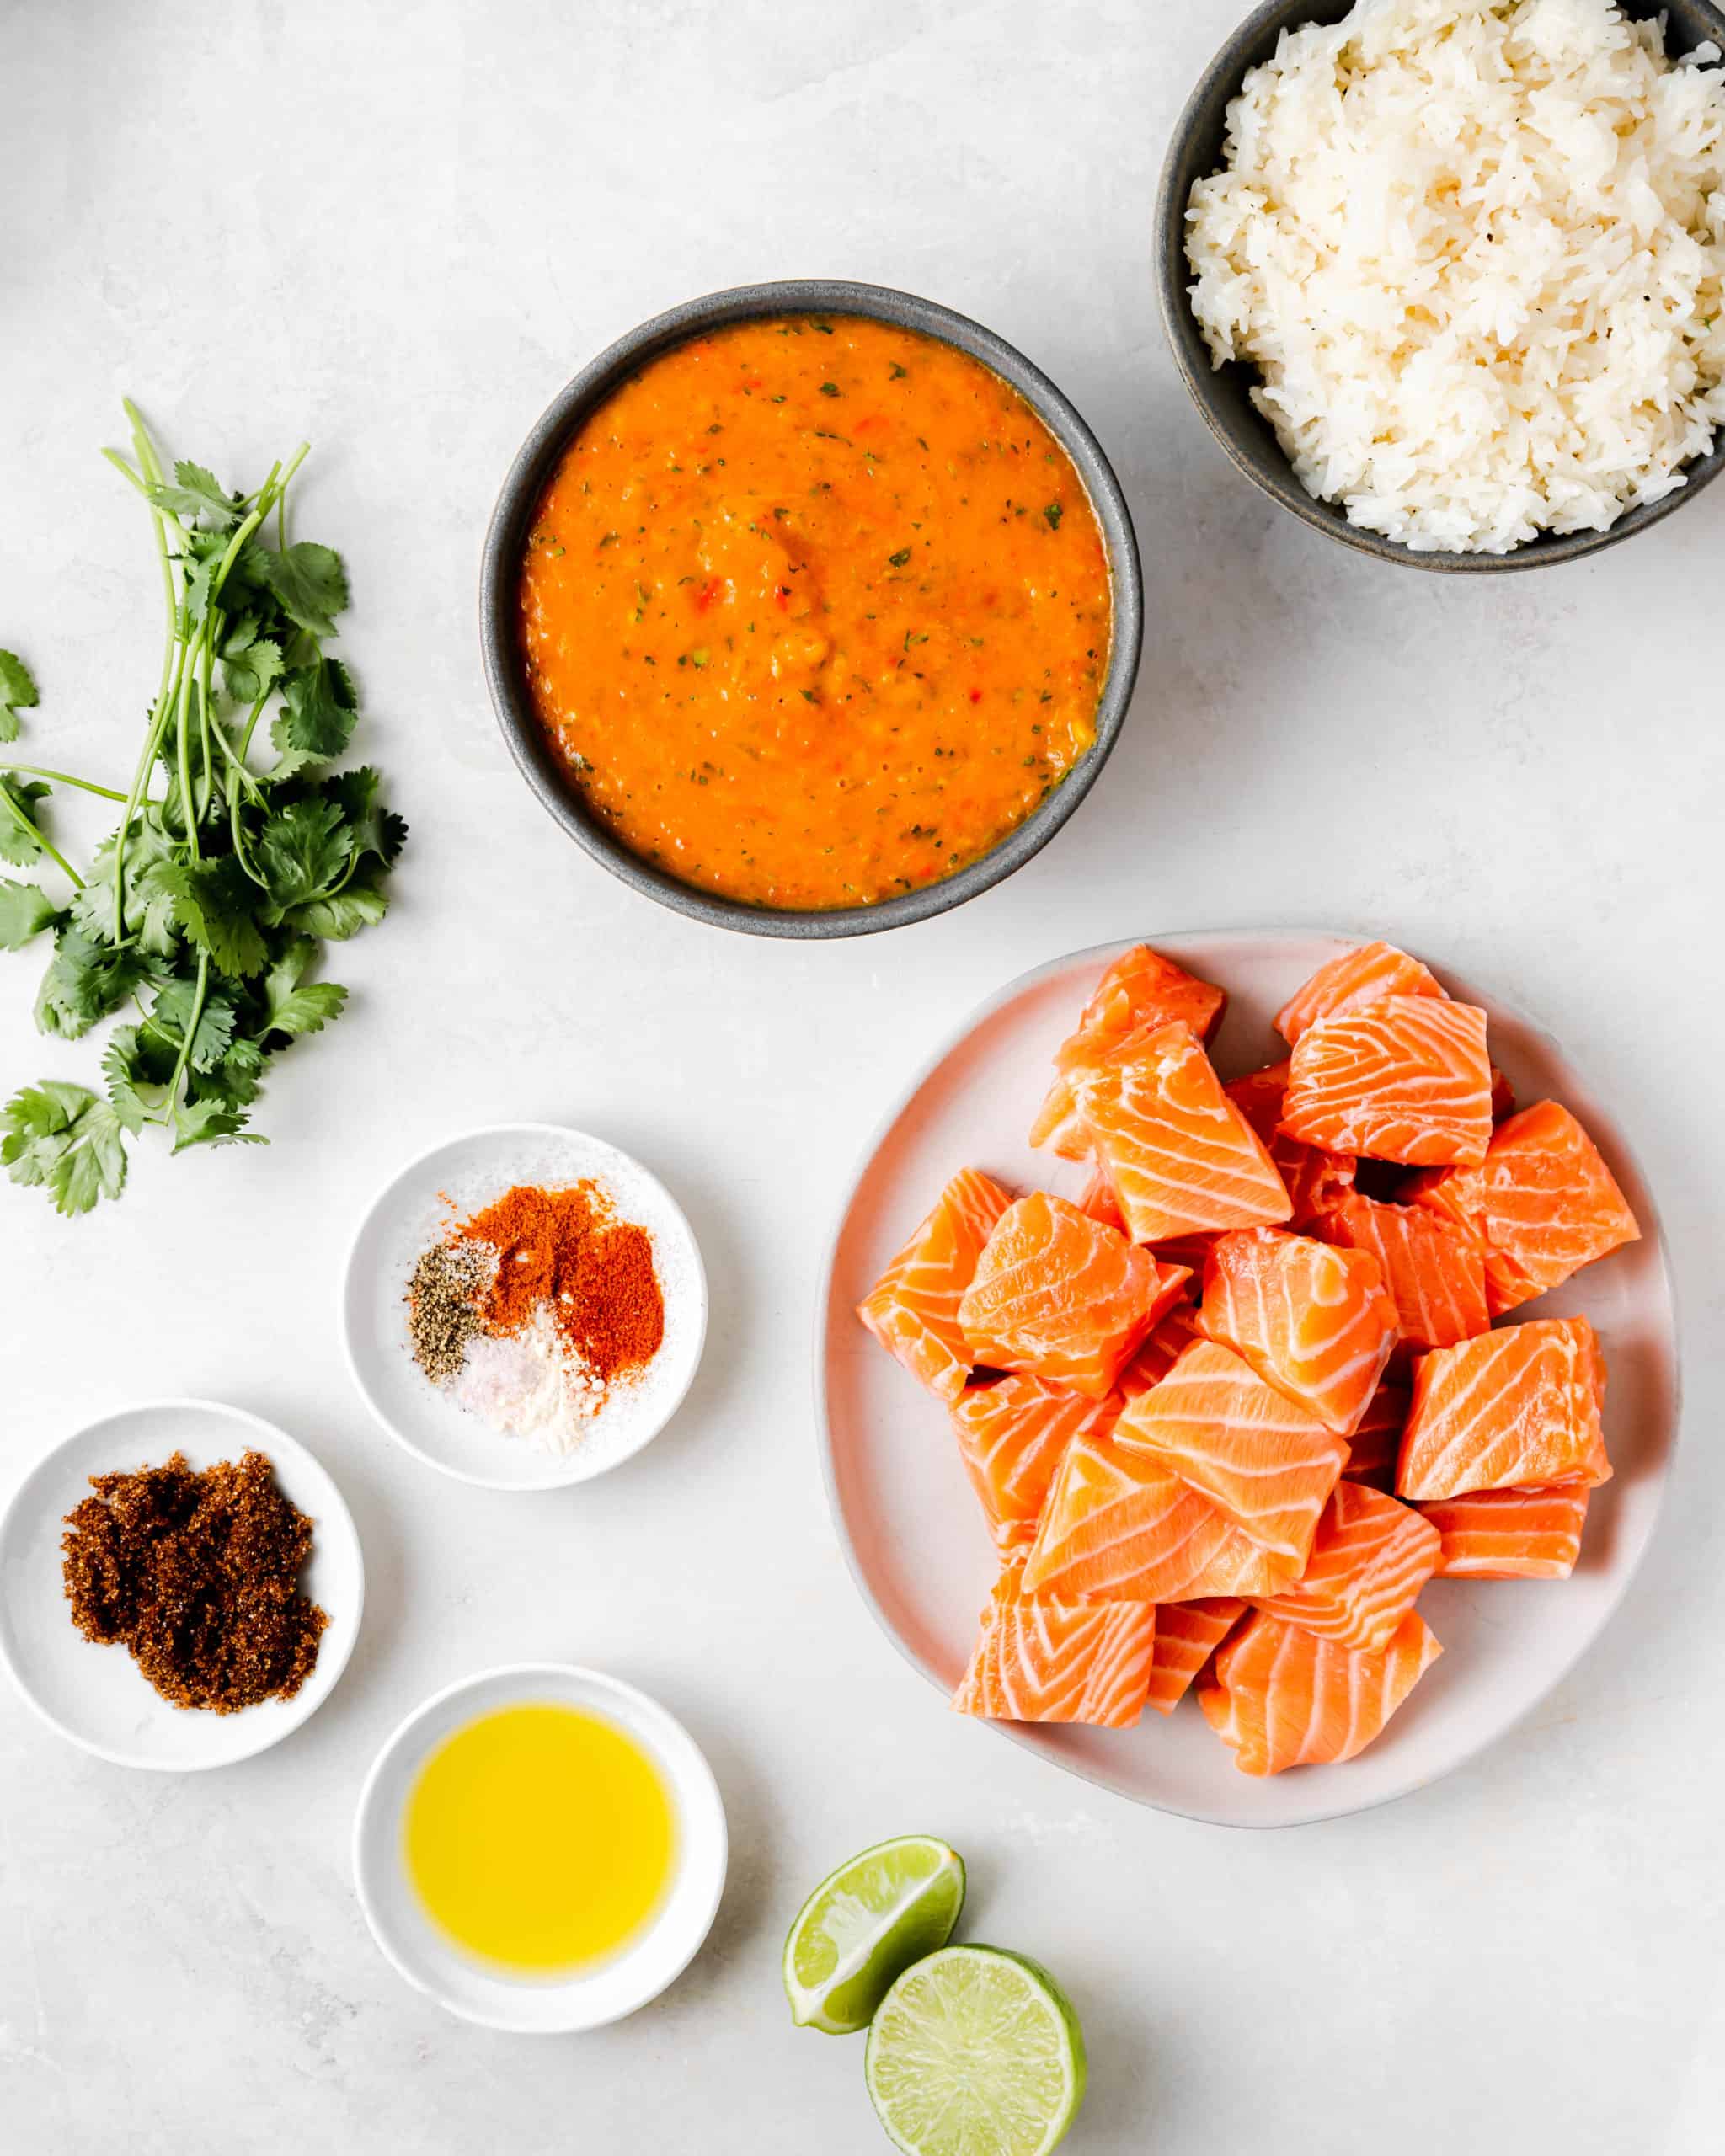 Spicy Salmon Bowls Ingredients